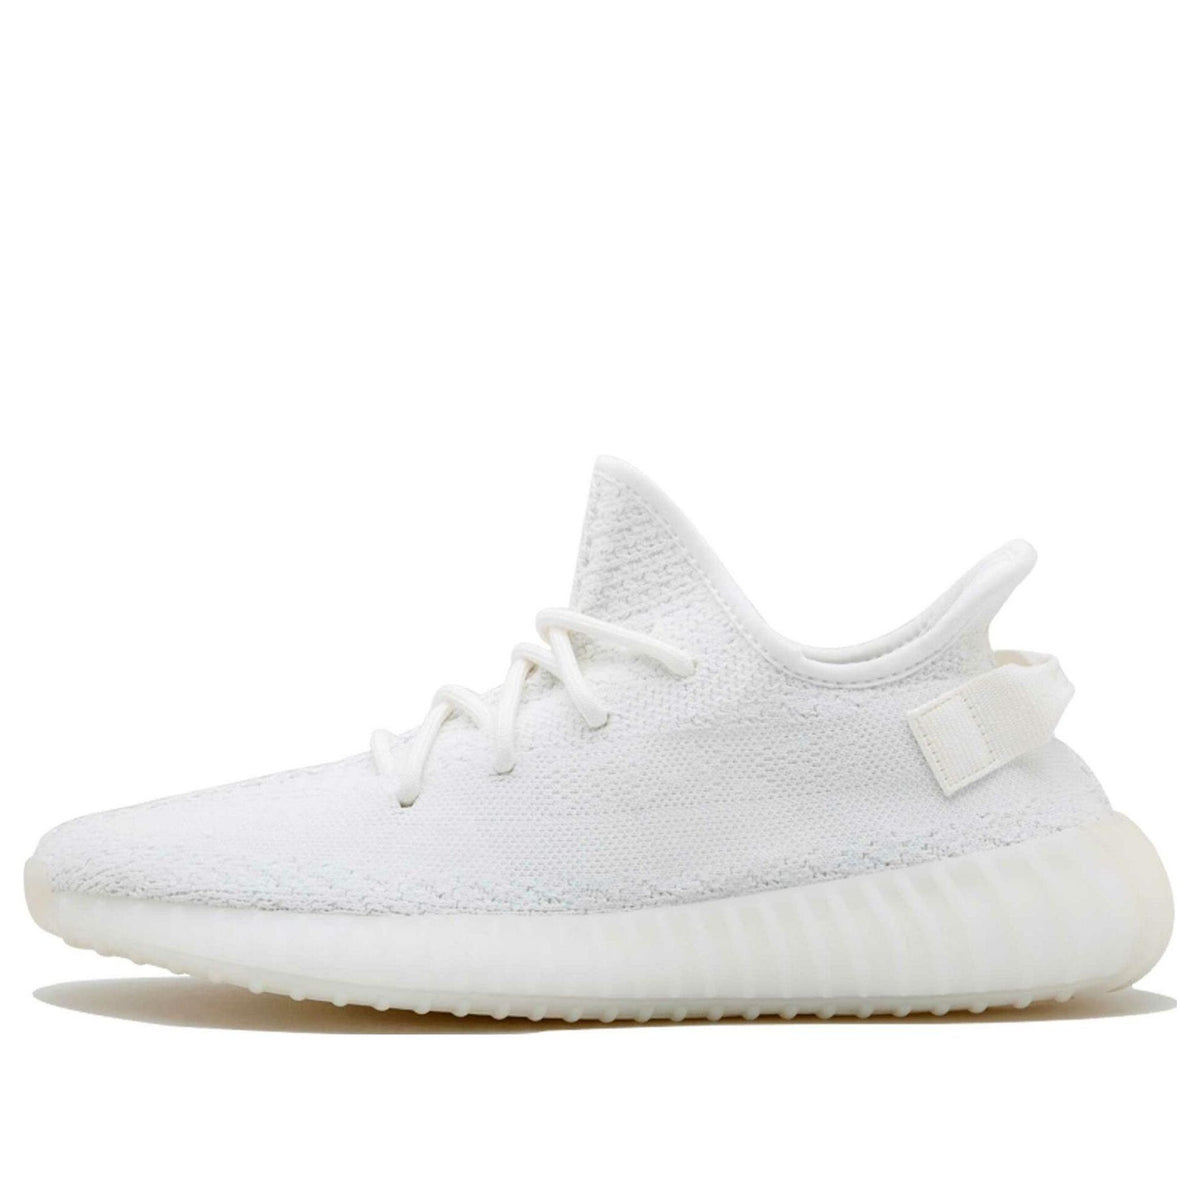 Adidas Yeezy Boost 350 V2 'Triple White' Shoes - Size 12